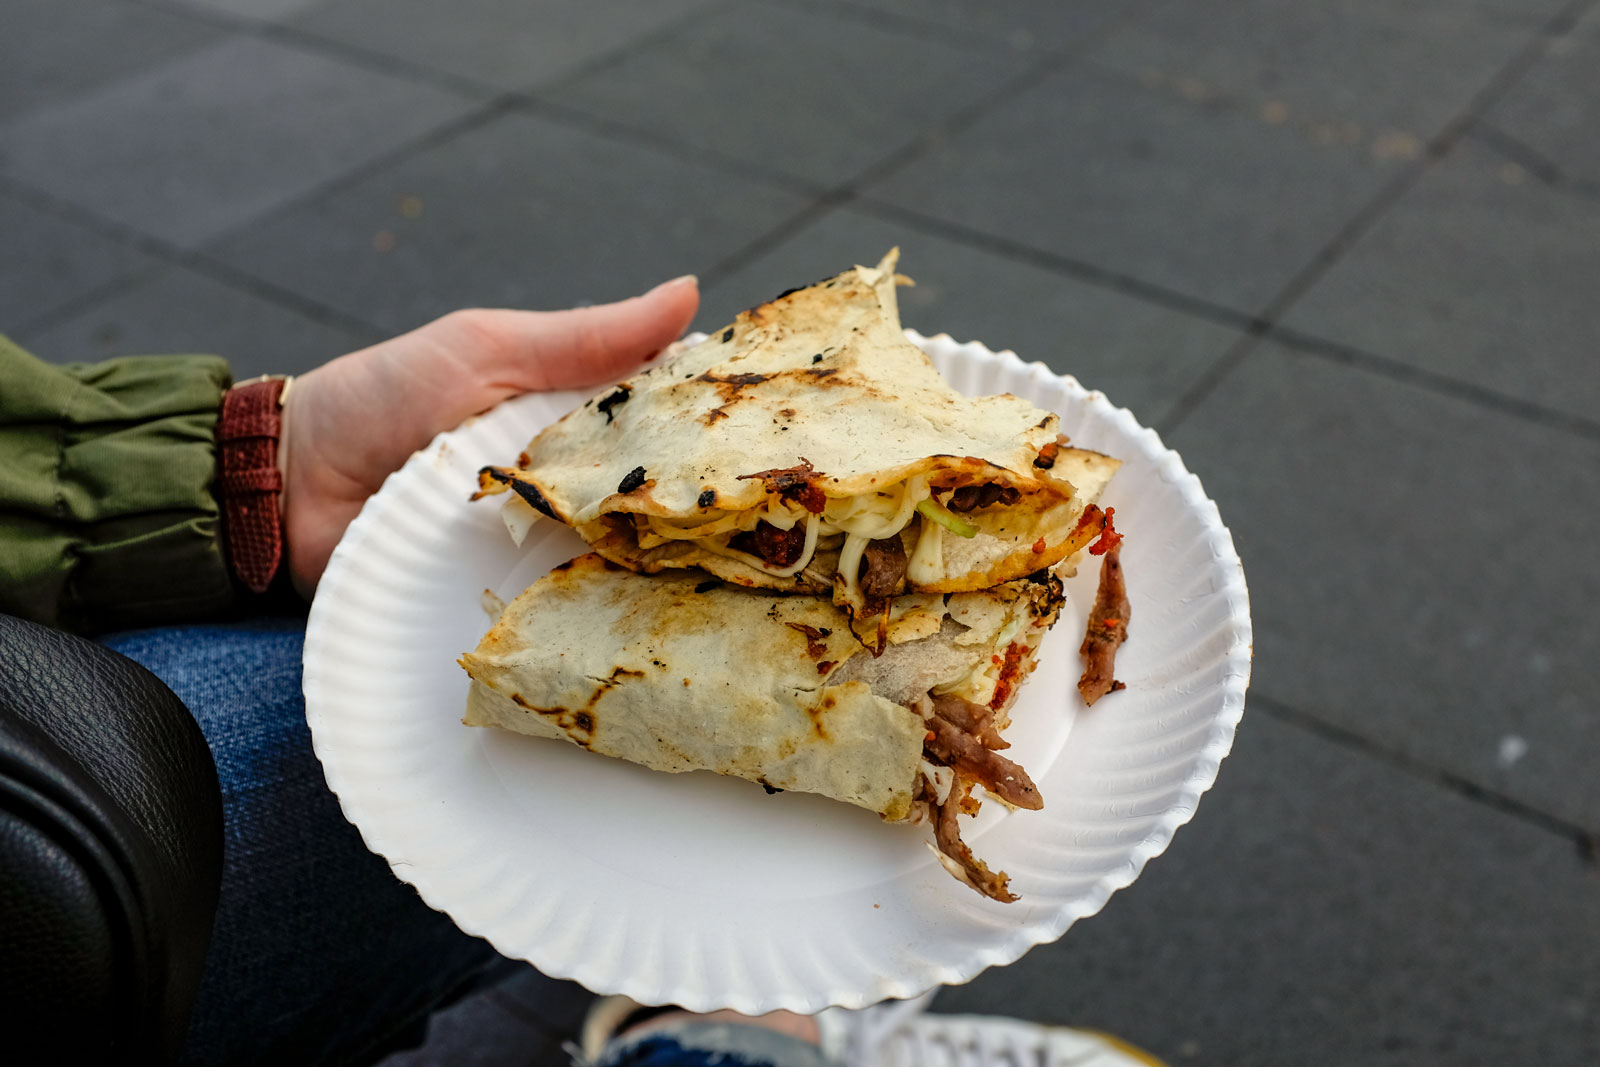 Alyssa holds a plate with a large quesadilla at a festival